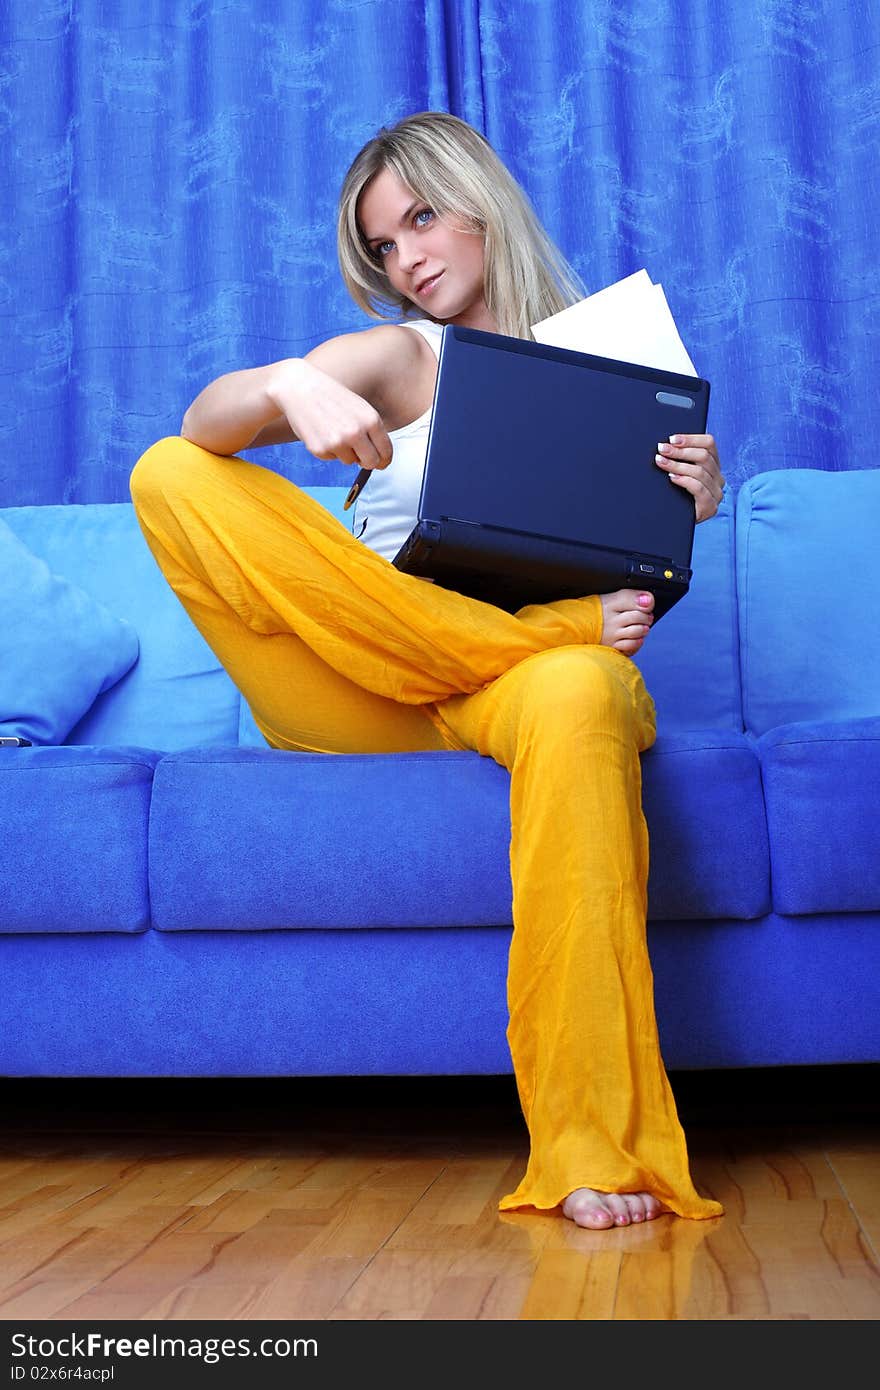 Thinking woman working with PC at home in sofa